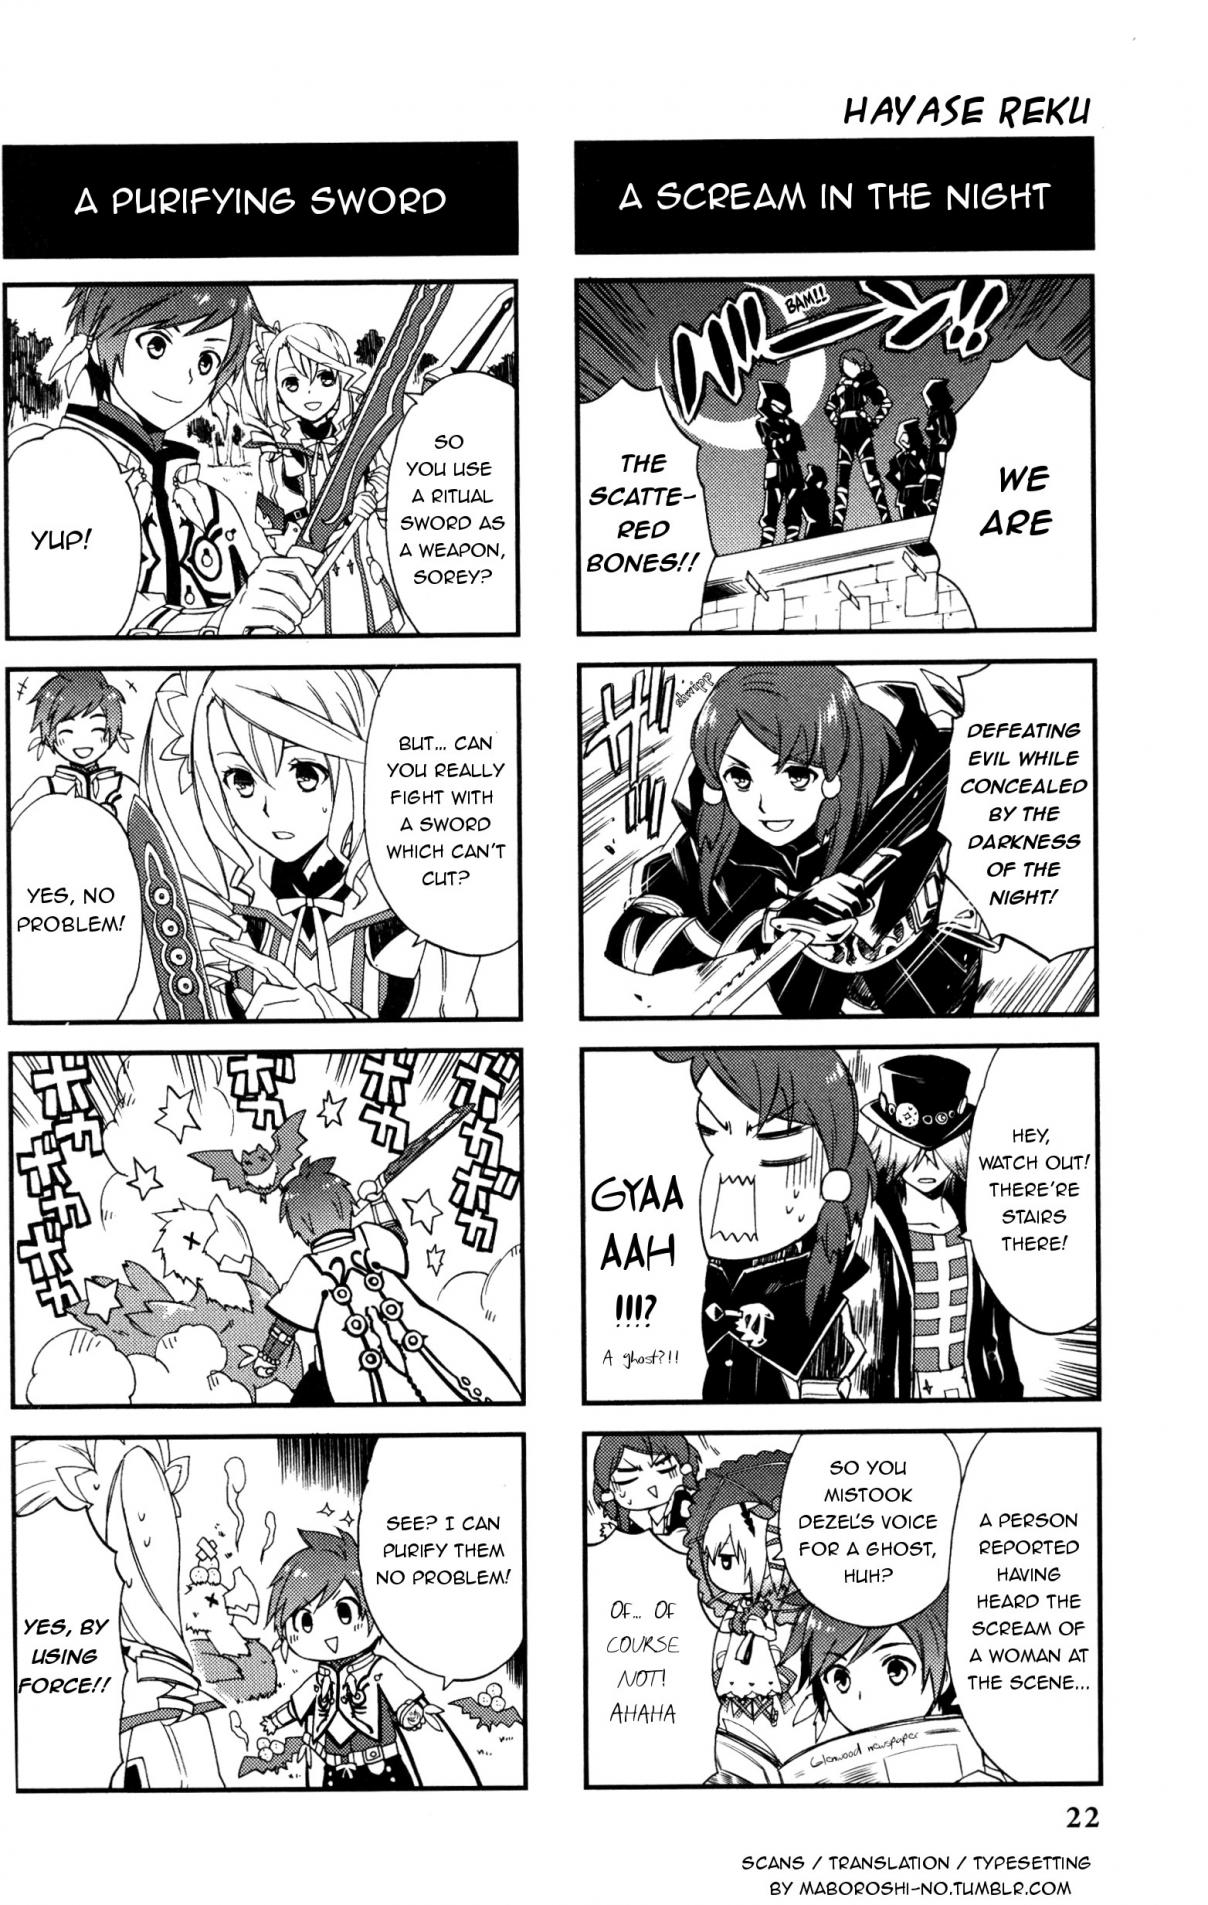 Tales of Zestiria 4koma Kings Ch. 3 Let's take our time.